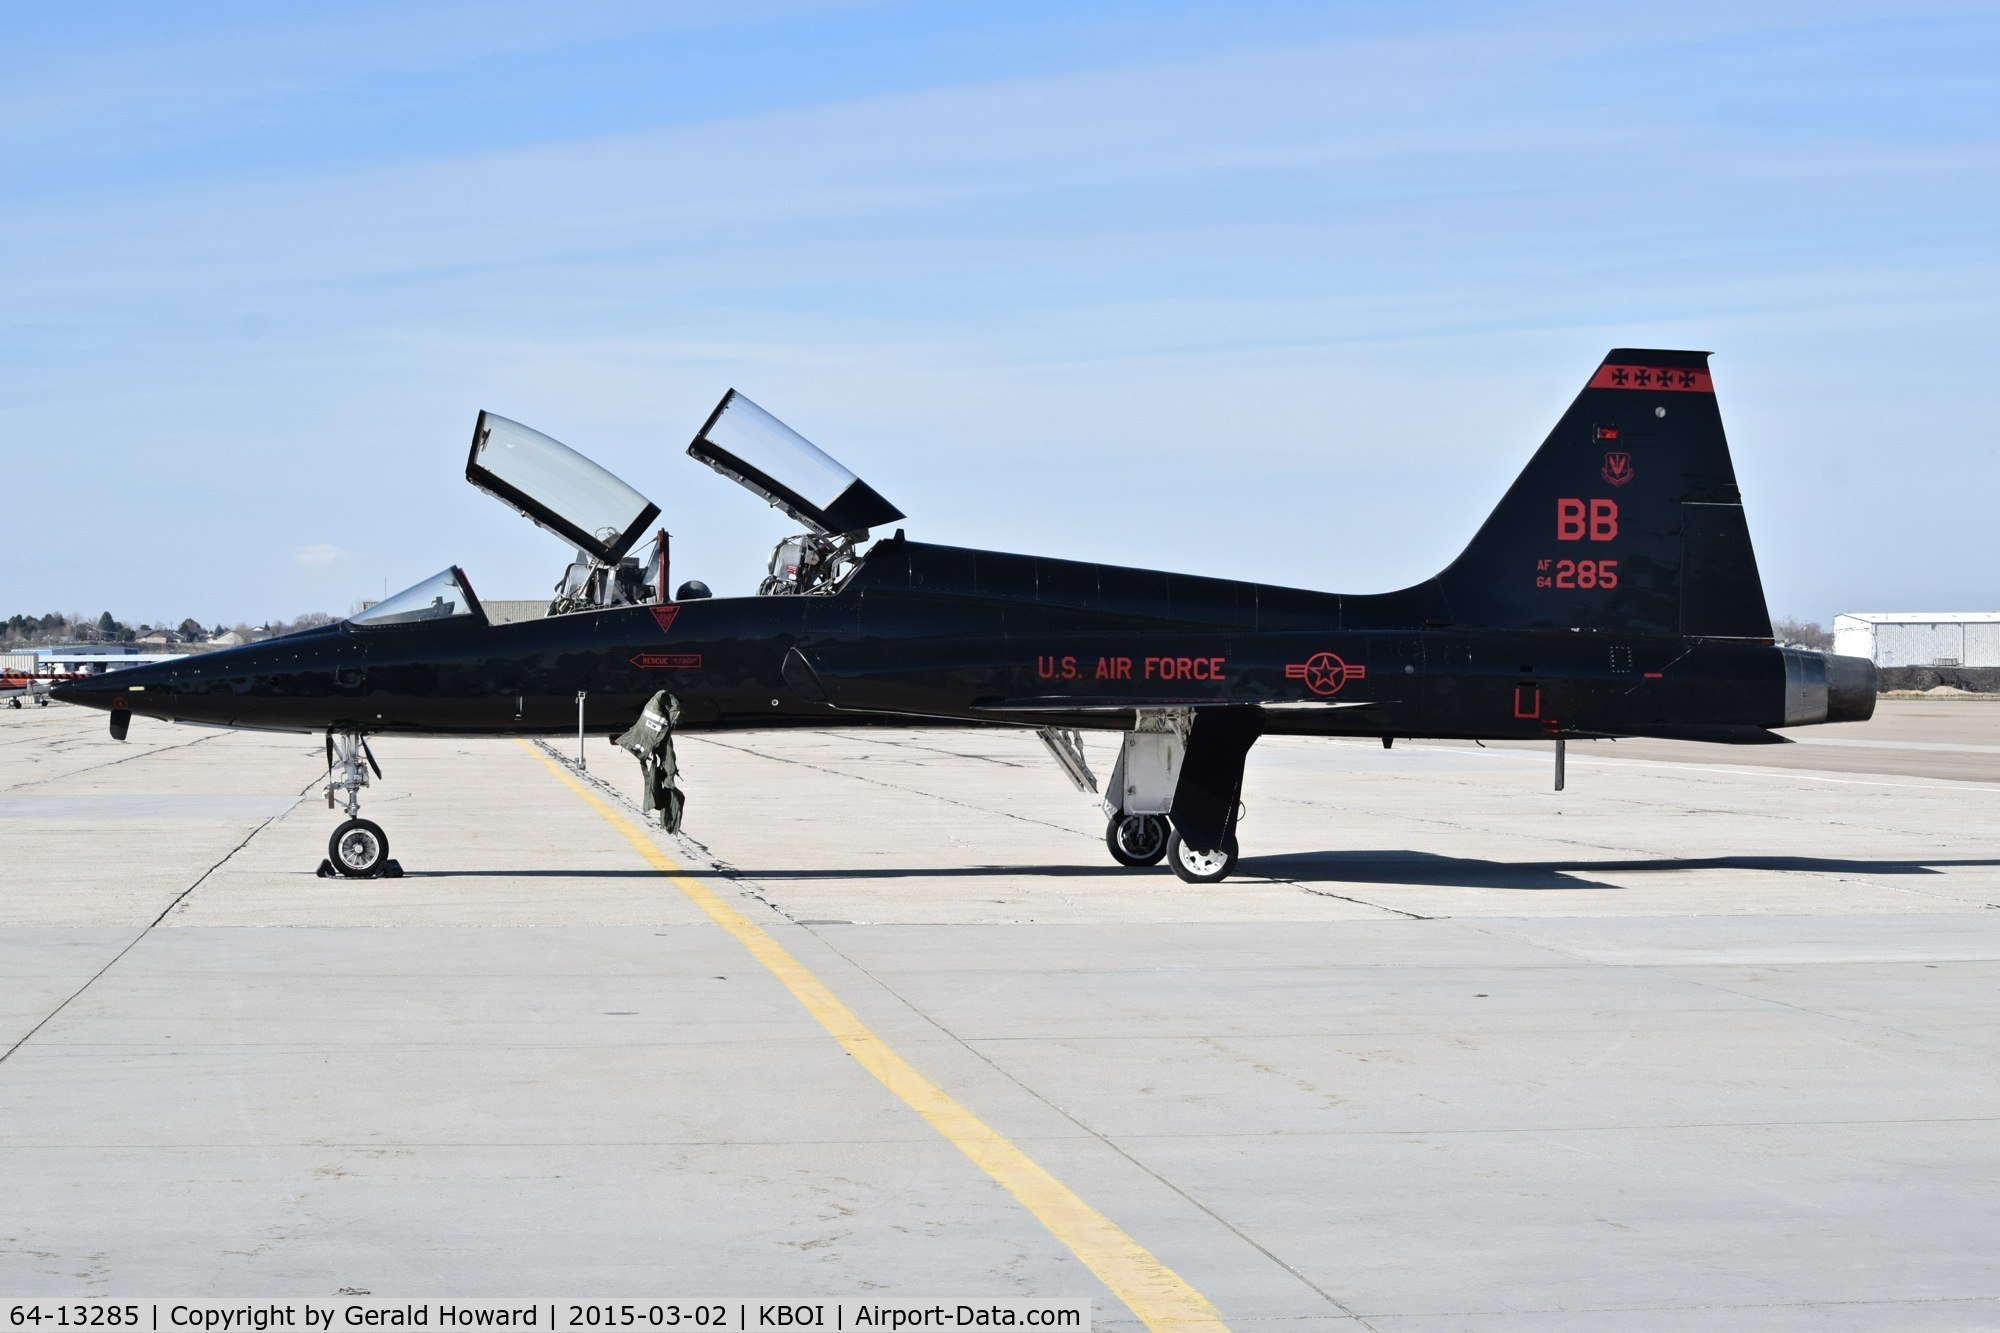 64-13285, 1964 Northrop T-38A Talon C/N N.5714, Parked on south GA ramp. 9th Recon Wing, Beale AFB, CA.